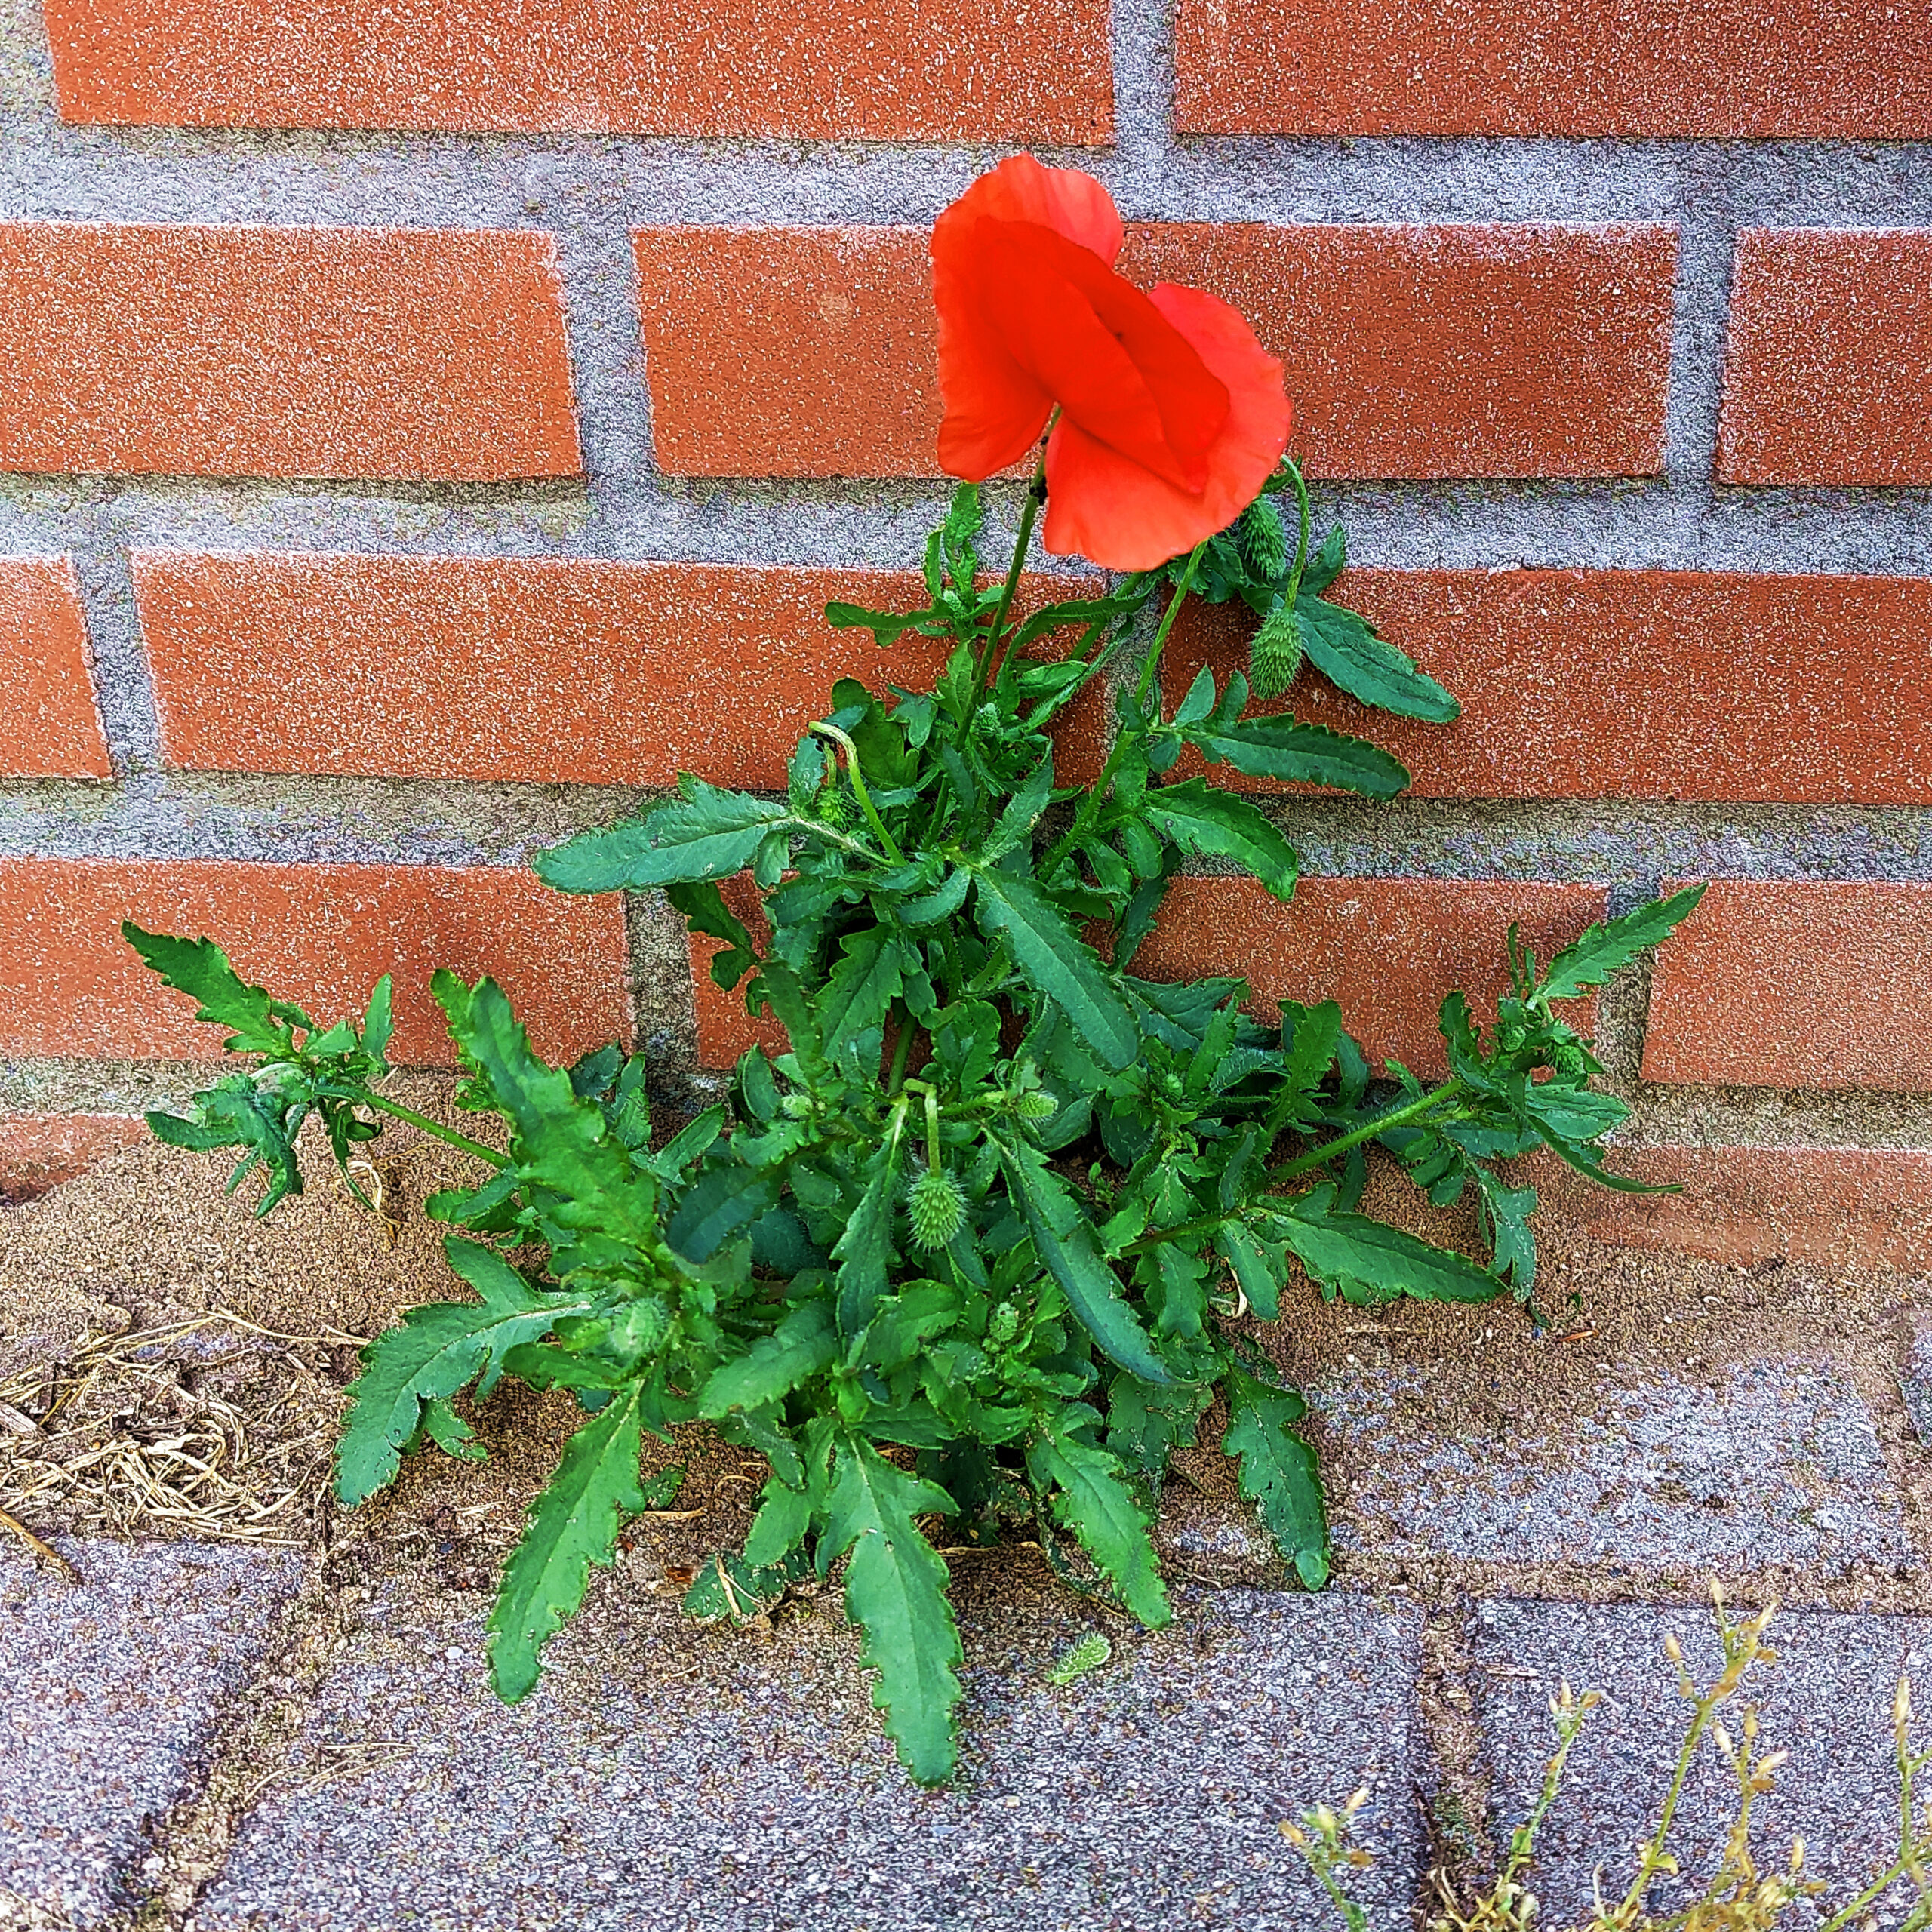 The strength of nature II: Wild flowers grows through splits in bricks and cement